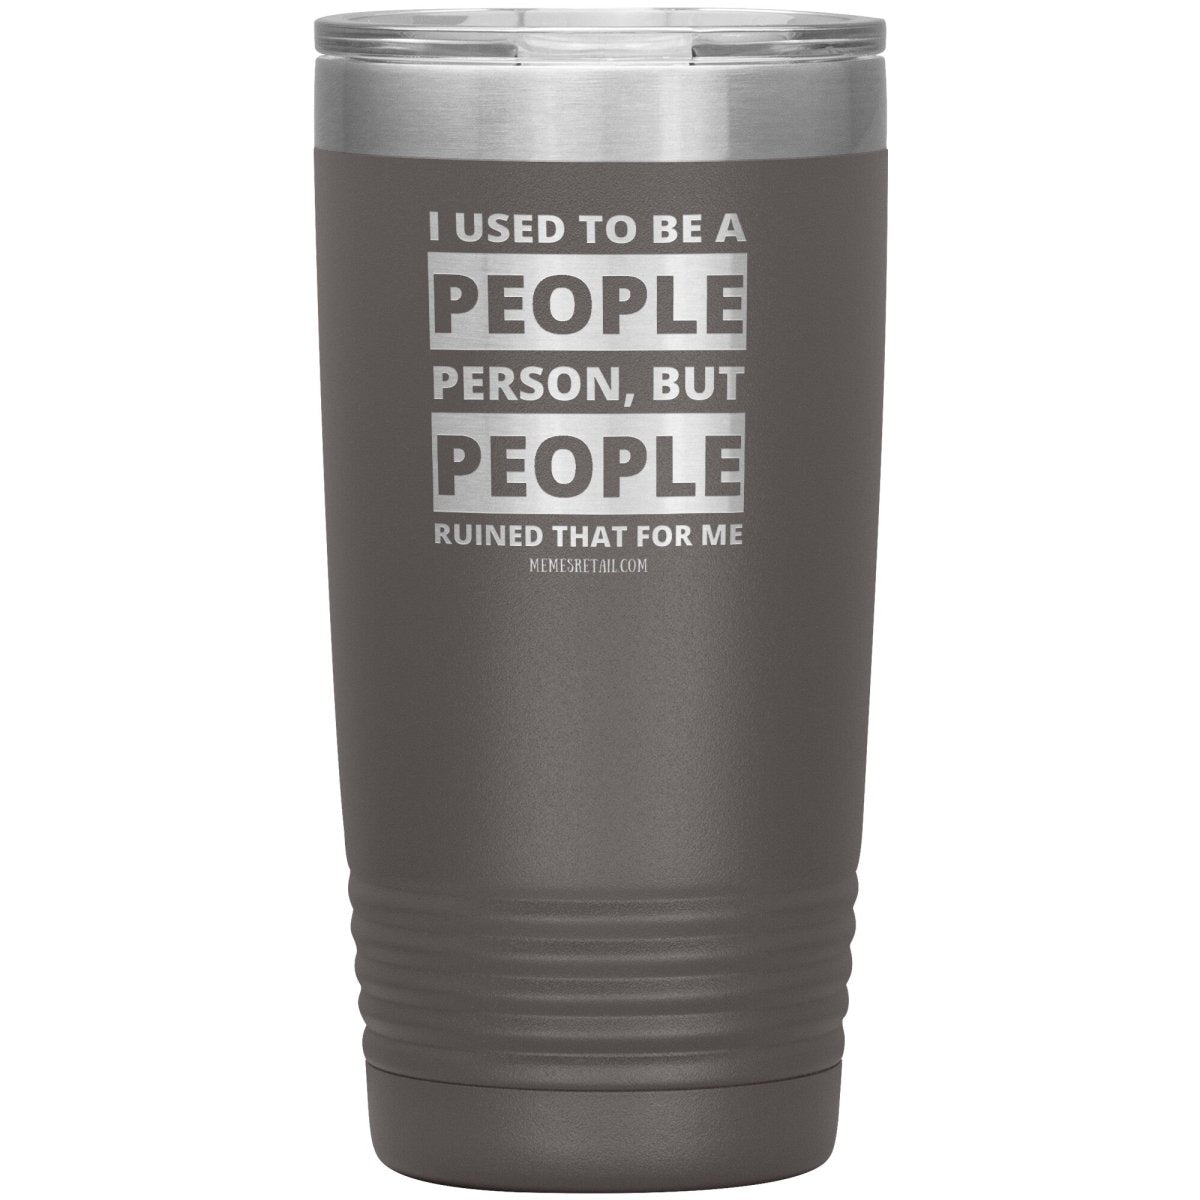 I Used To Be A People Person, But People Ruined That For Me Tumblers, 20oz Insulated Tumbler / Pewter - MemesRetail.com